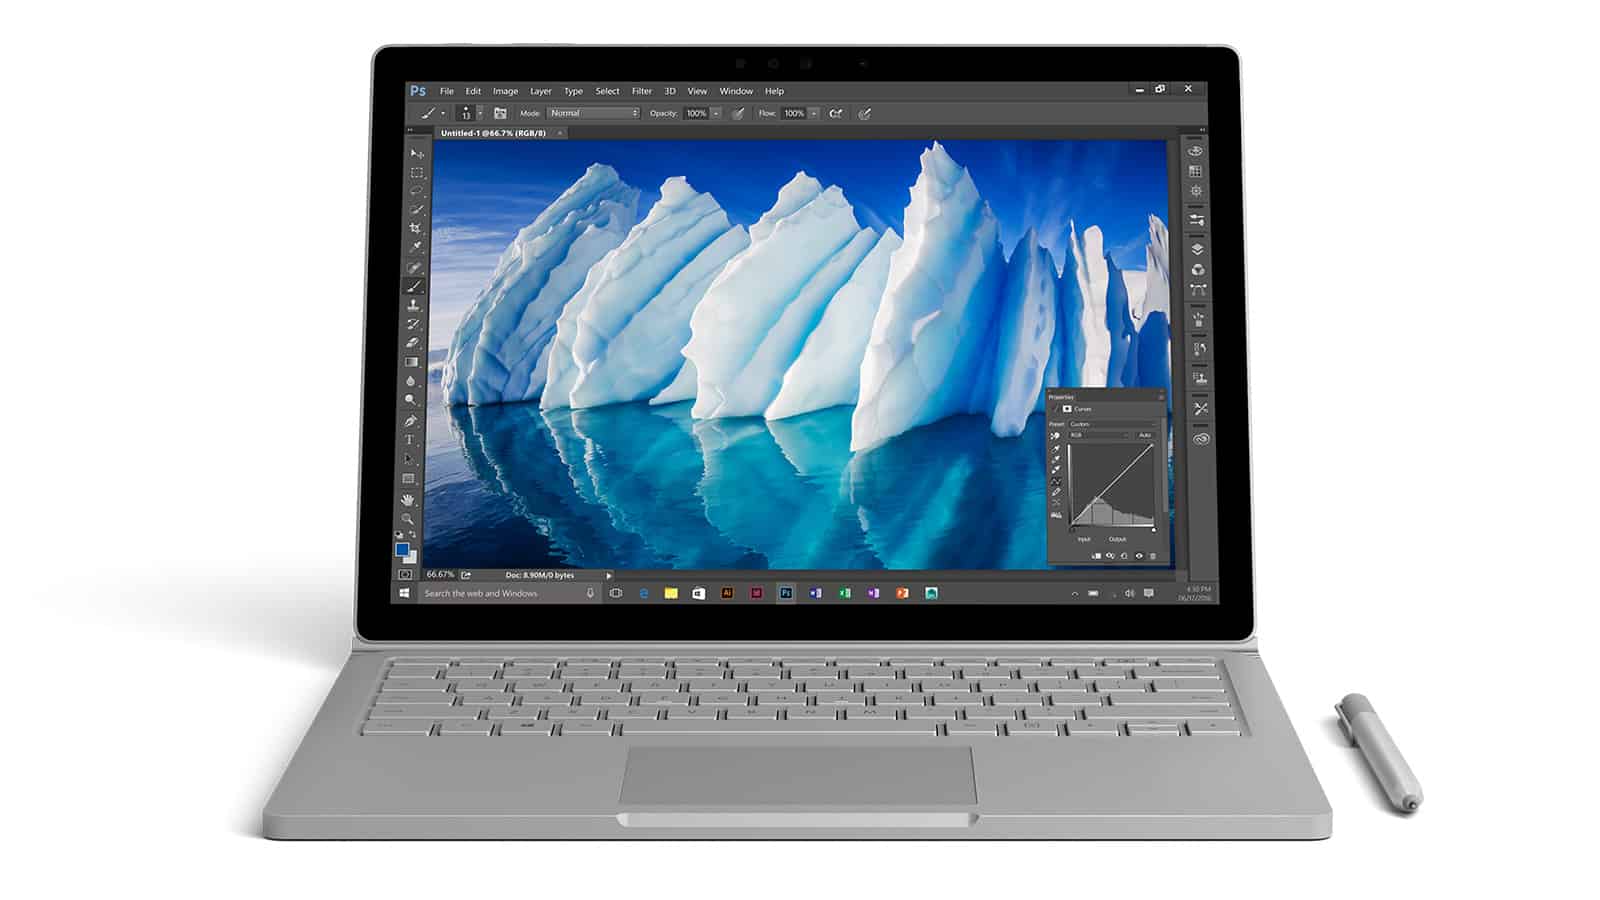 Microsoft Surface Book with Performance Base Specs – Full Technical Specifications Image